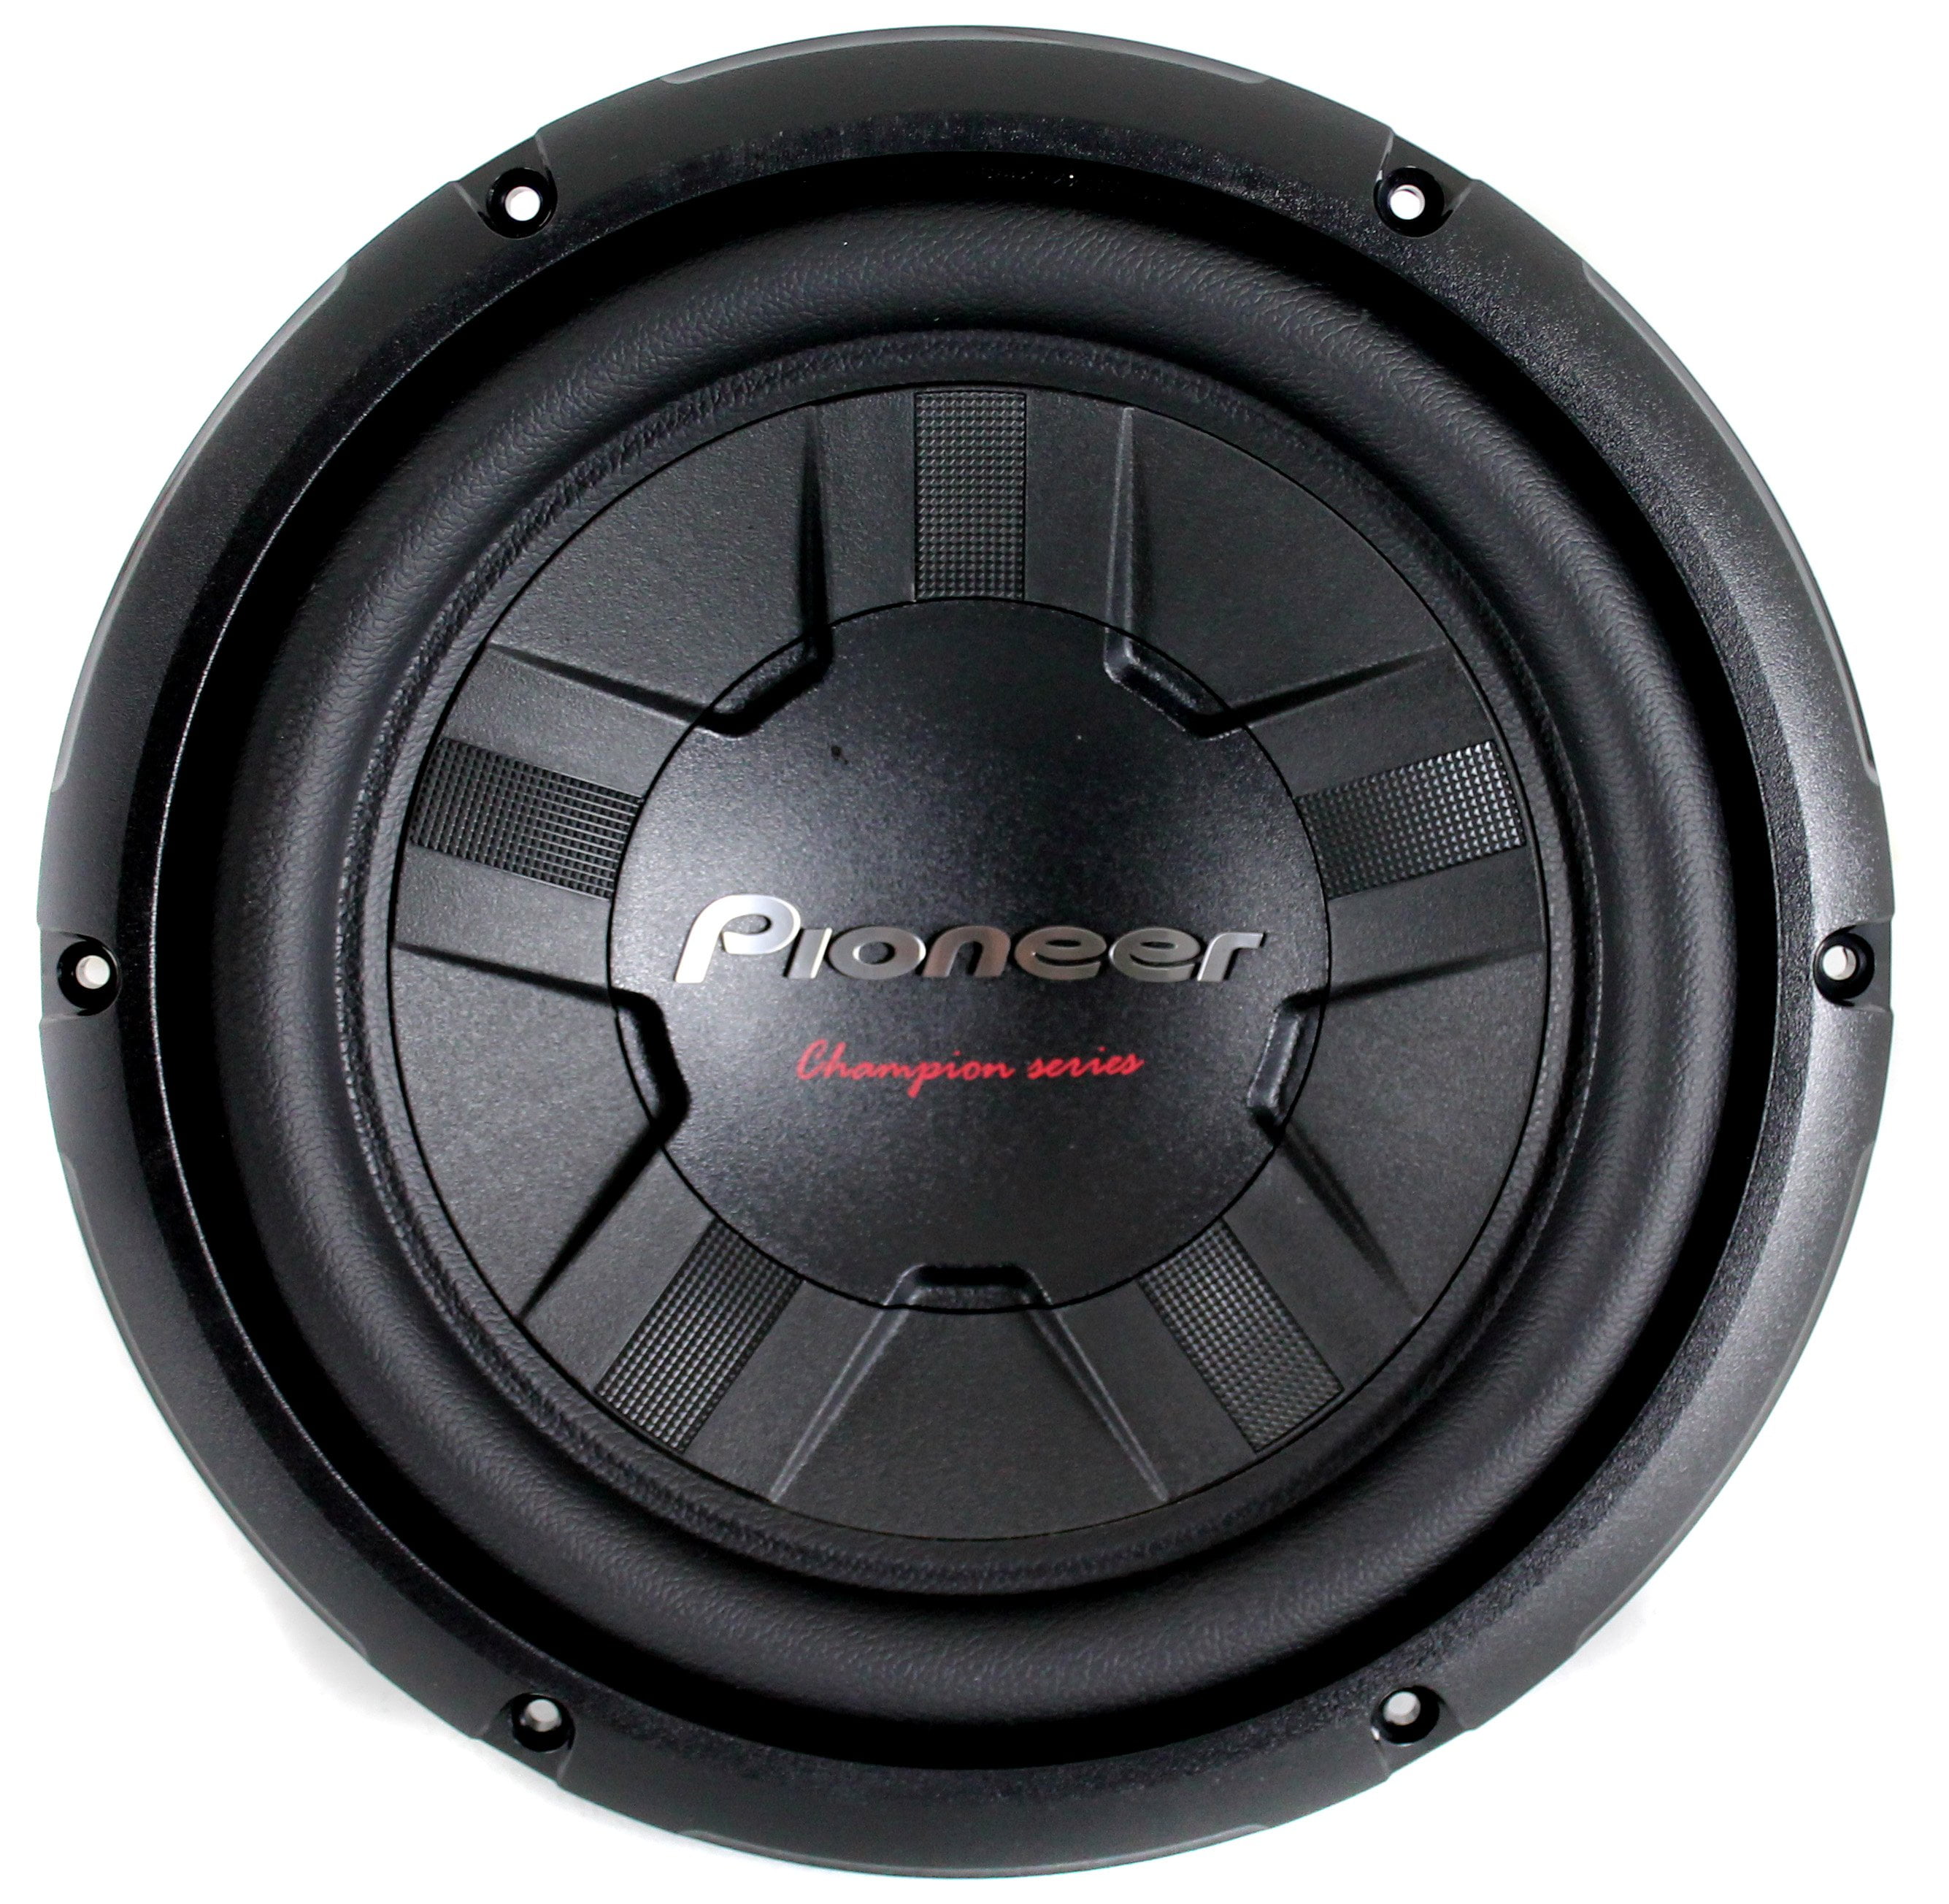 2 12 inch pioneer subwoofers